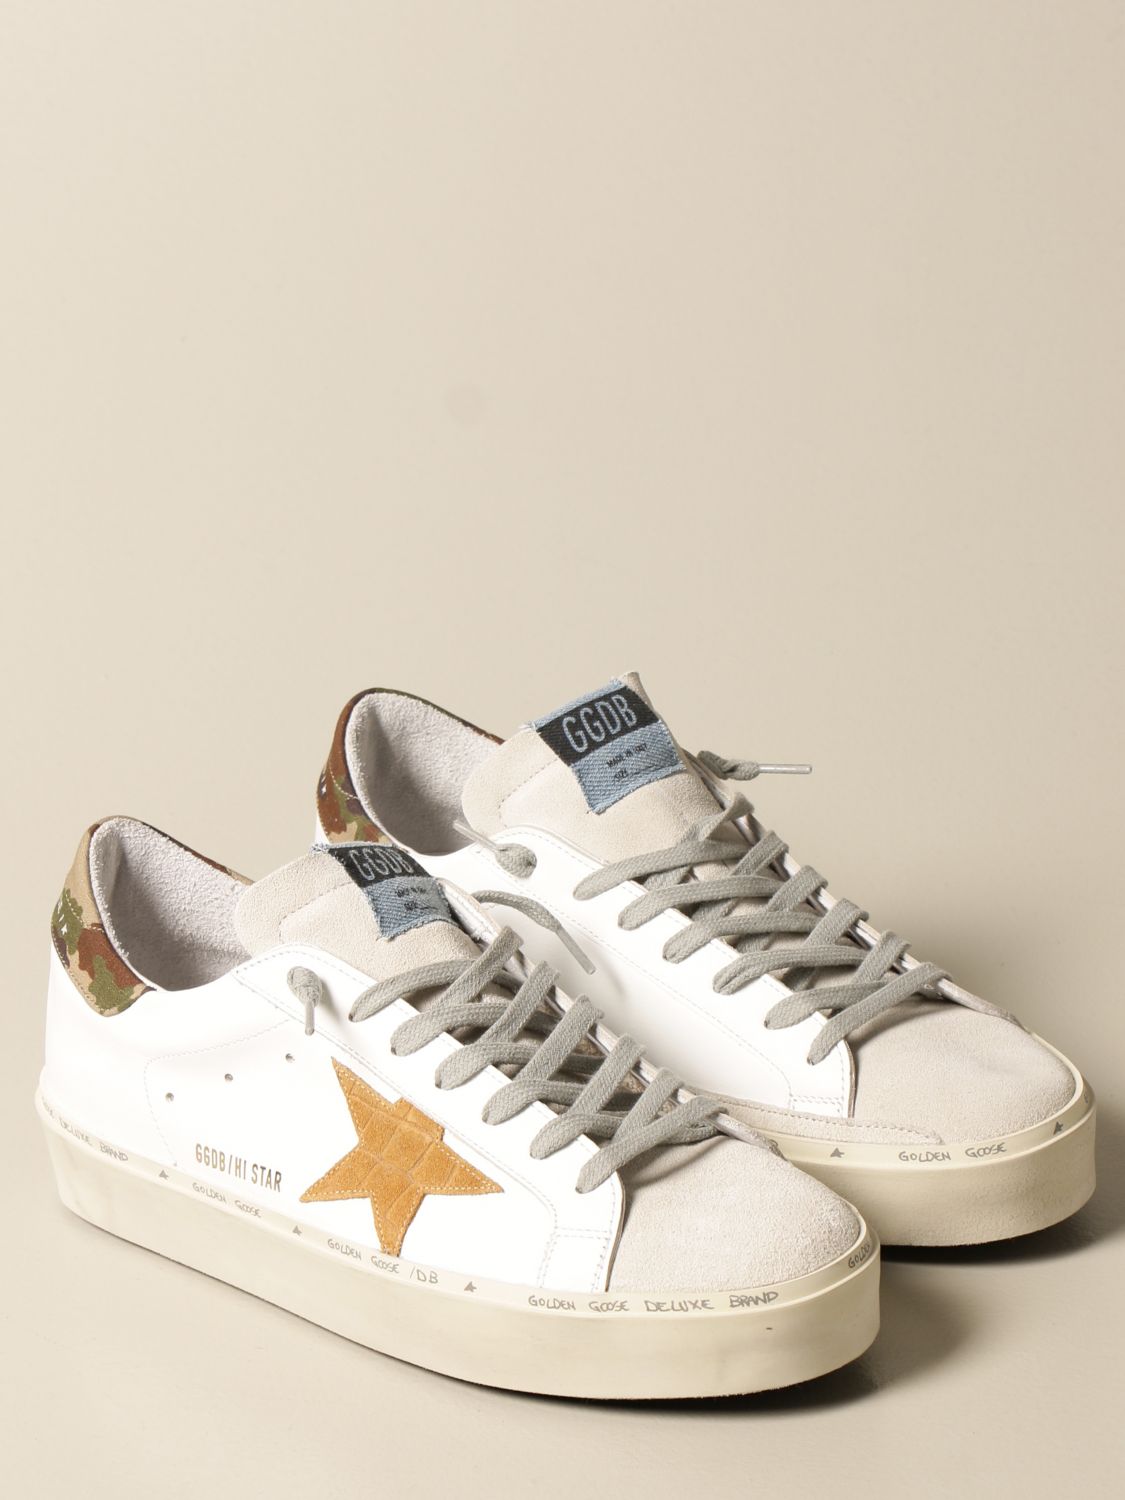 GOLDEN GOOSE: Histar sneakers in leather and suede | Sneakers Golden ...